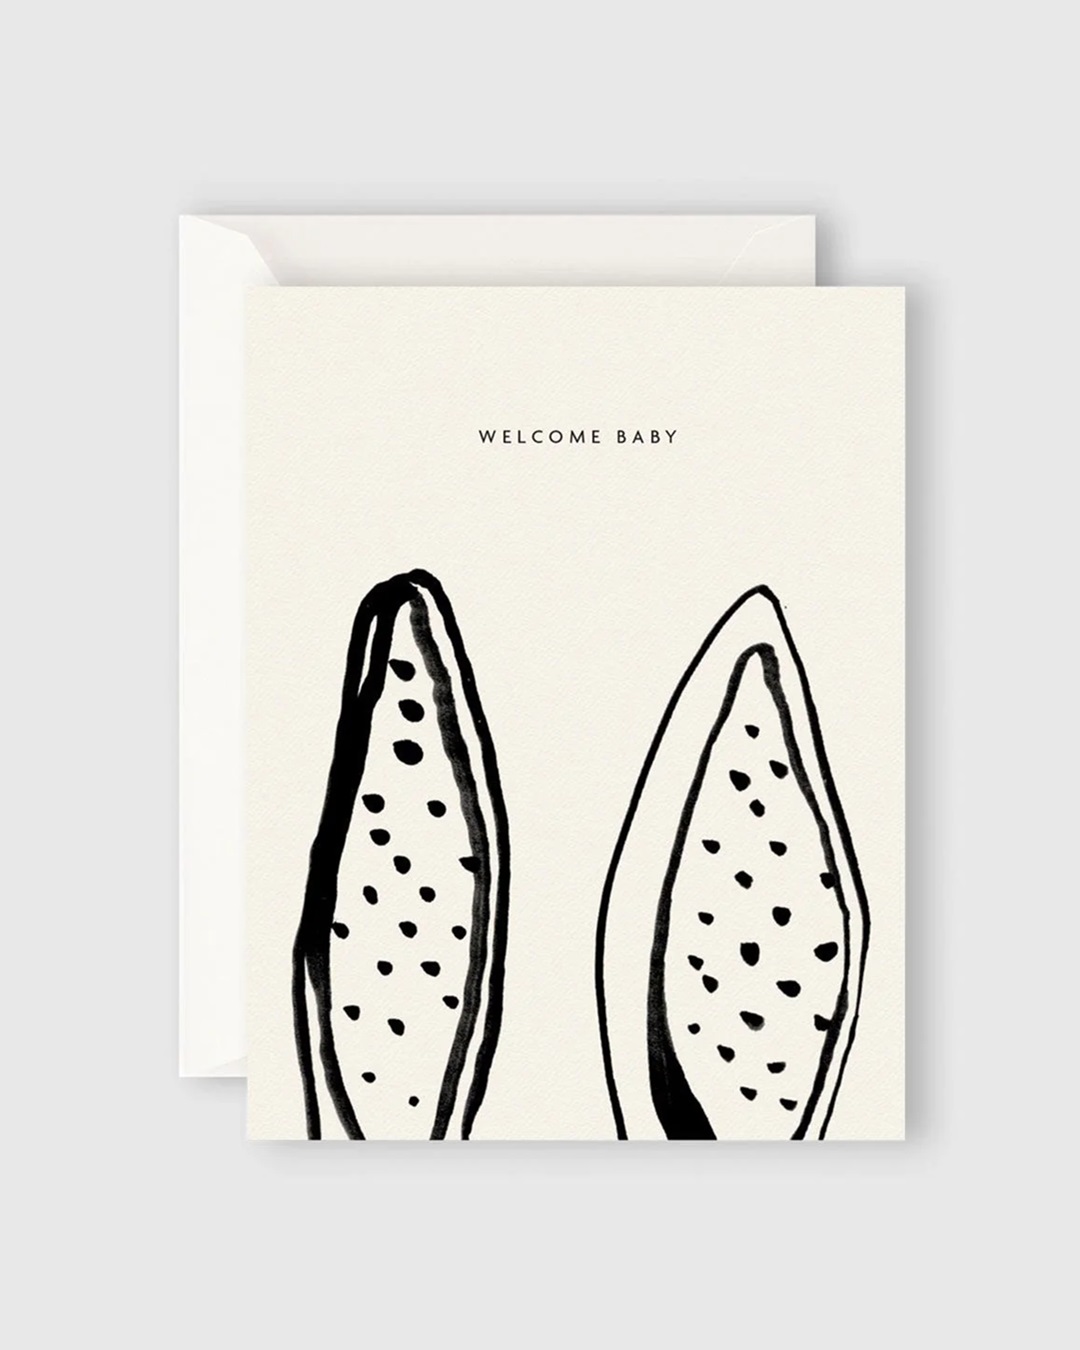 White card with black bunny ears and welcome baby text